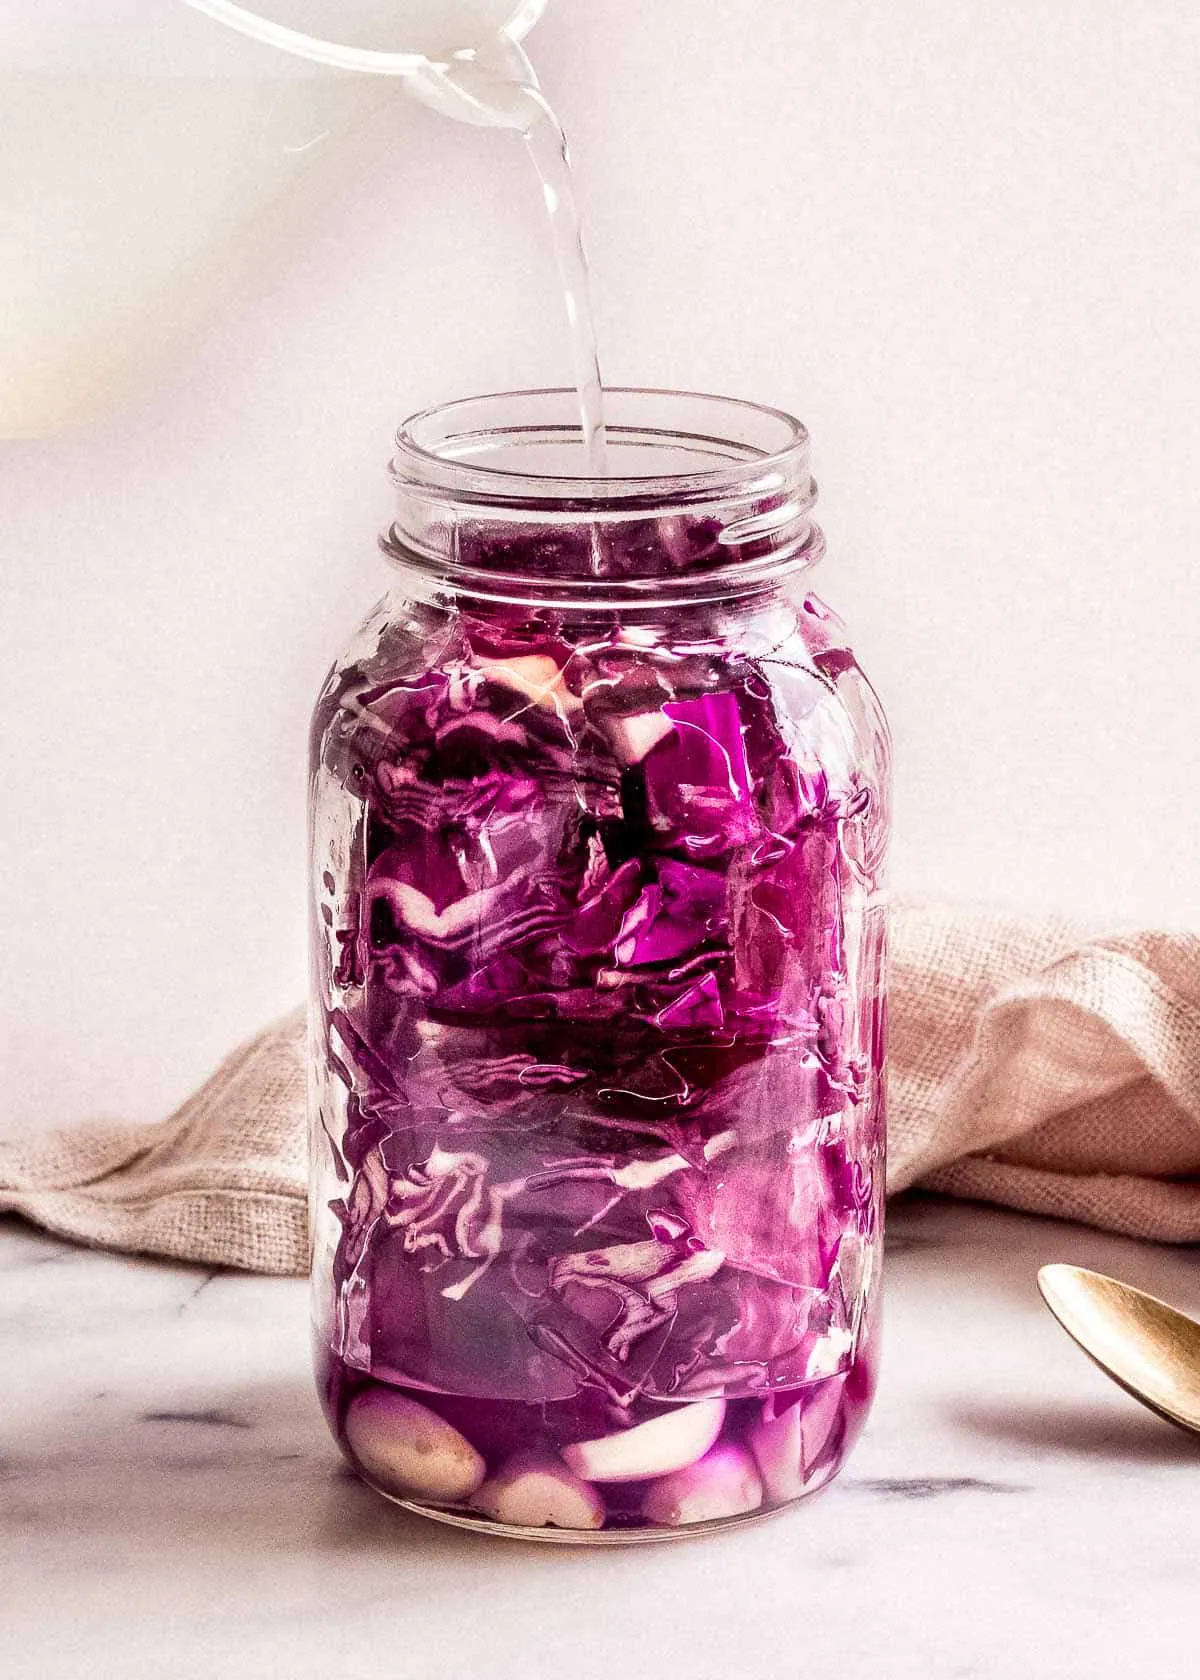 Salt water being poured into jar of red cabbage